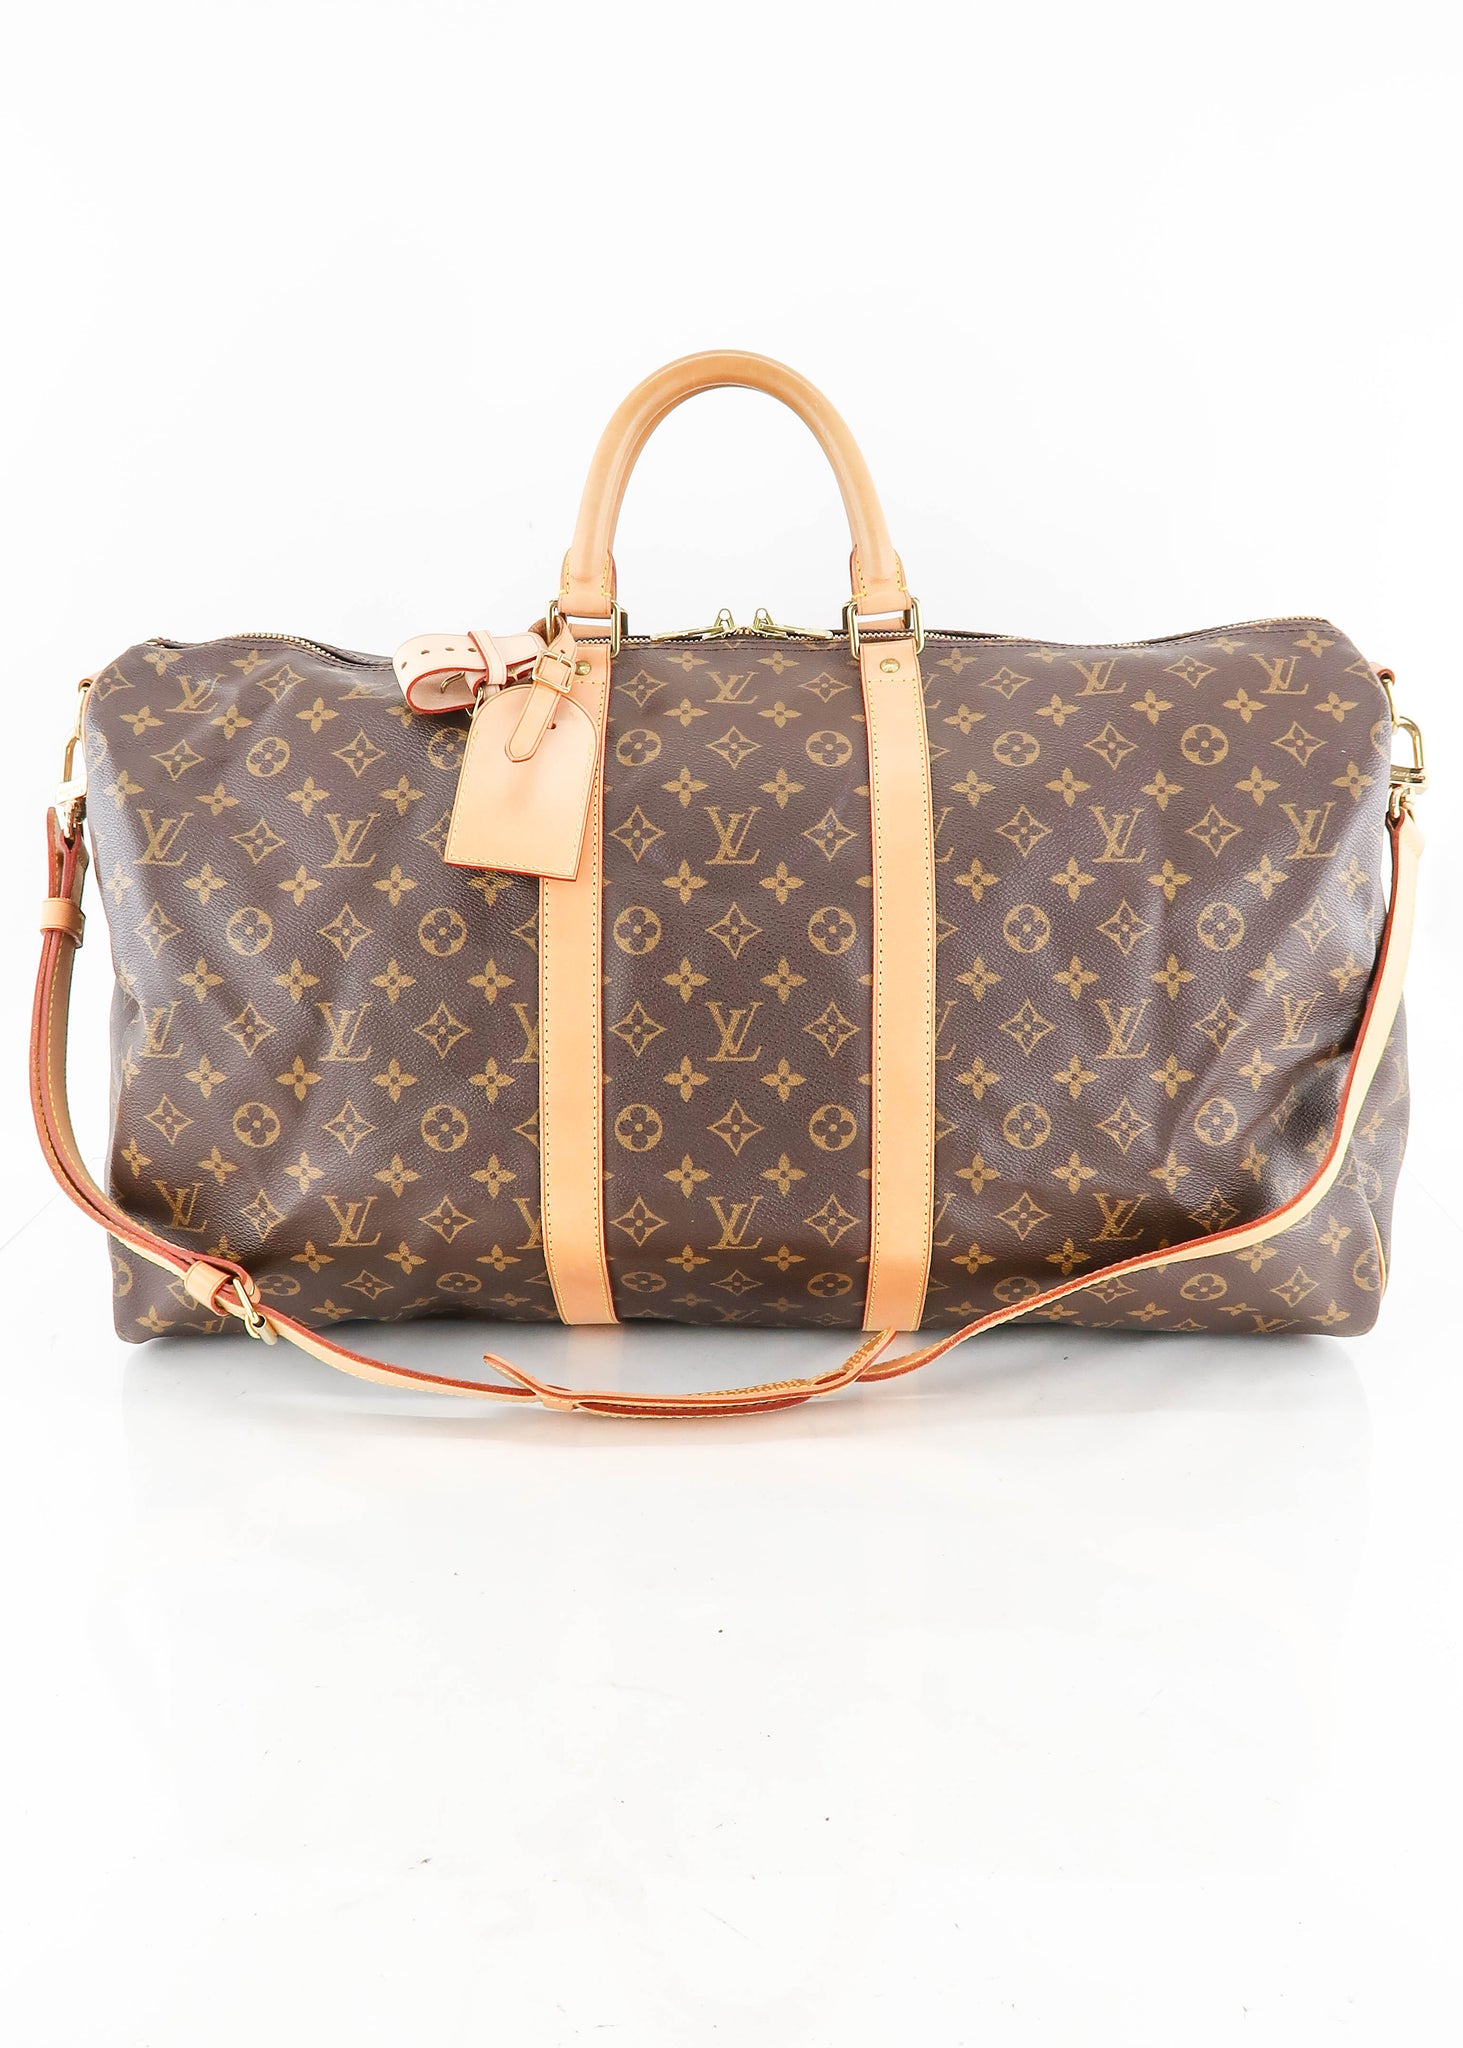 Louis Vuitton Keepall Bandouliere 55 Brown in Monogram Coated